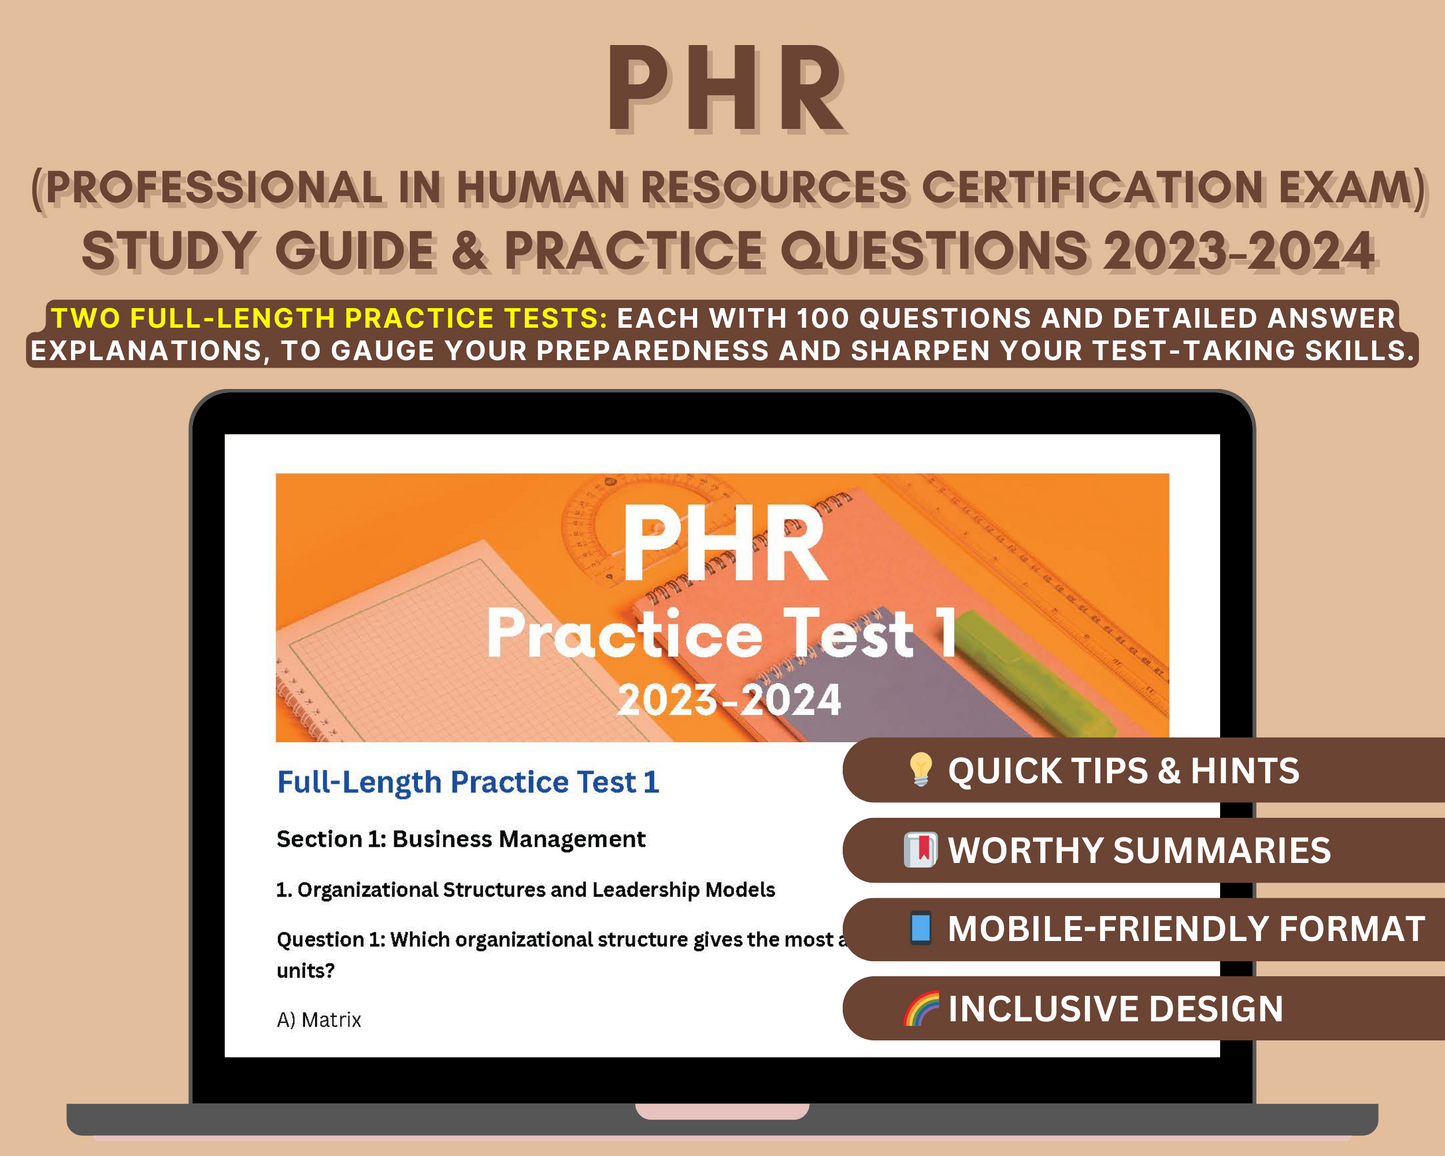 PHR Exam Study Guide 2023-2024: In-Depth Content Review, Practice Tests & Exam Strategies for Aspiring HR Professionals!